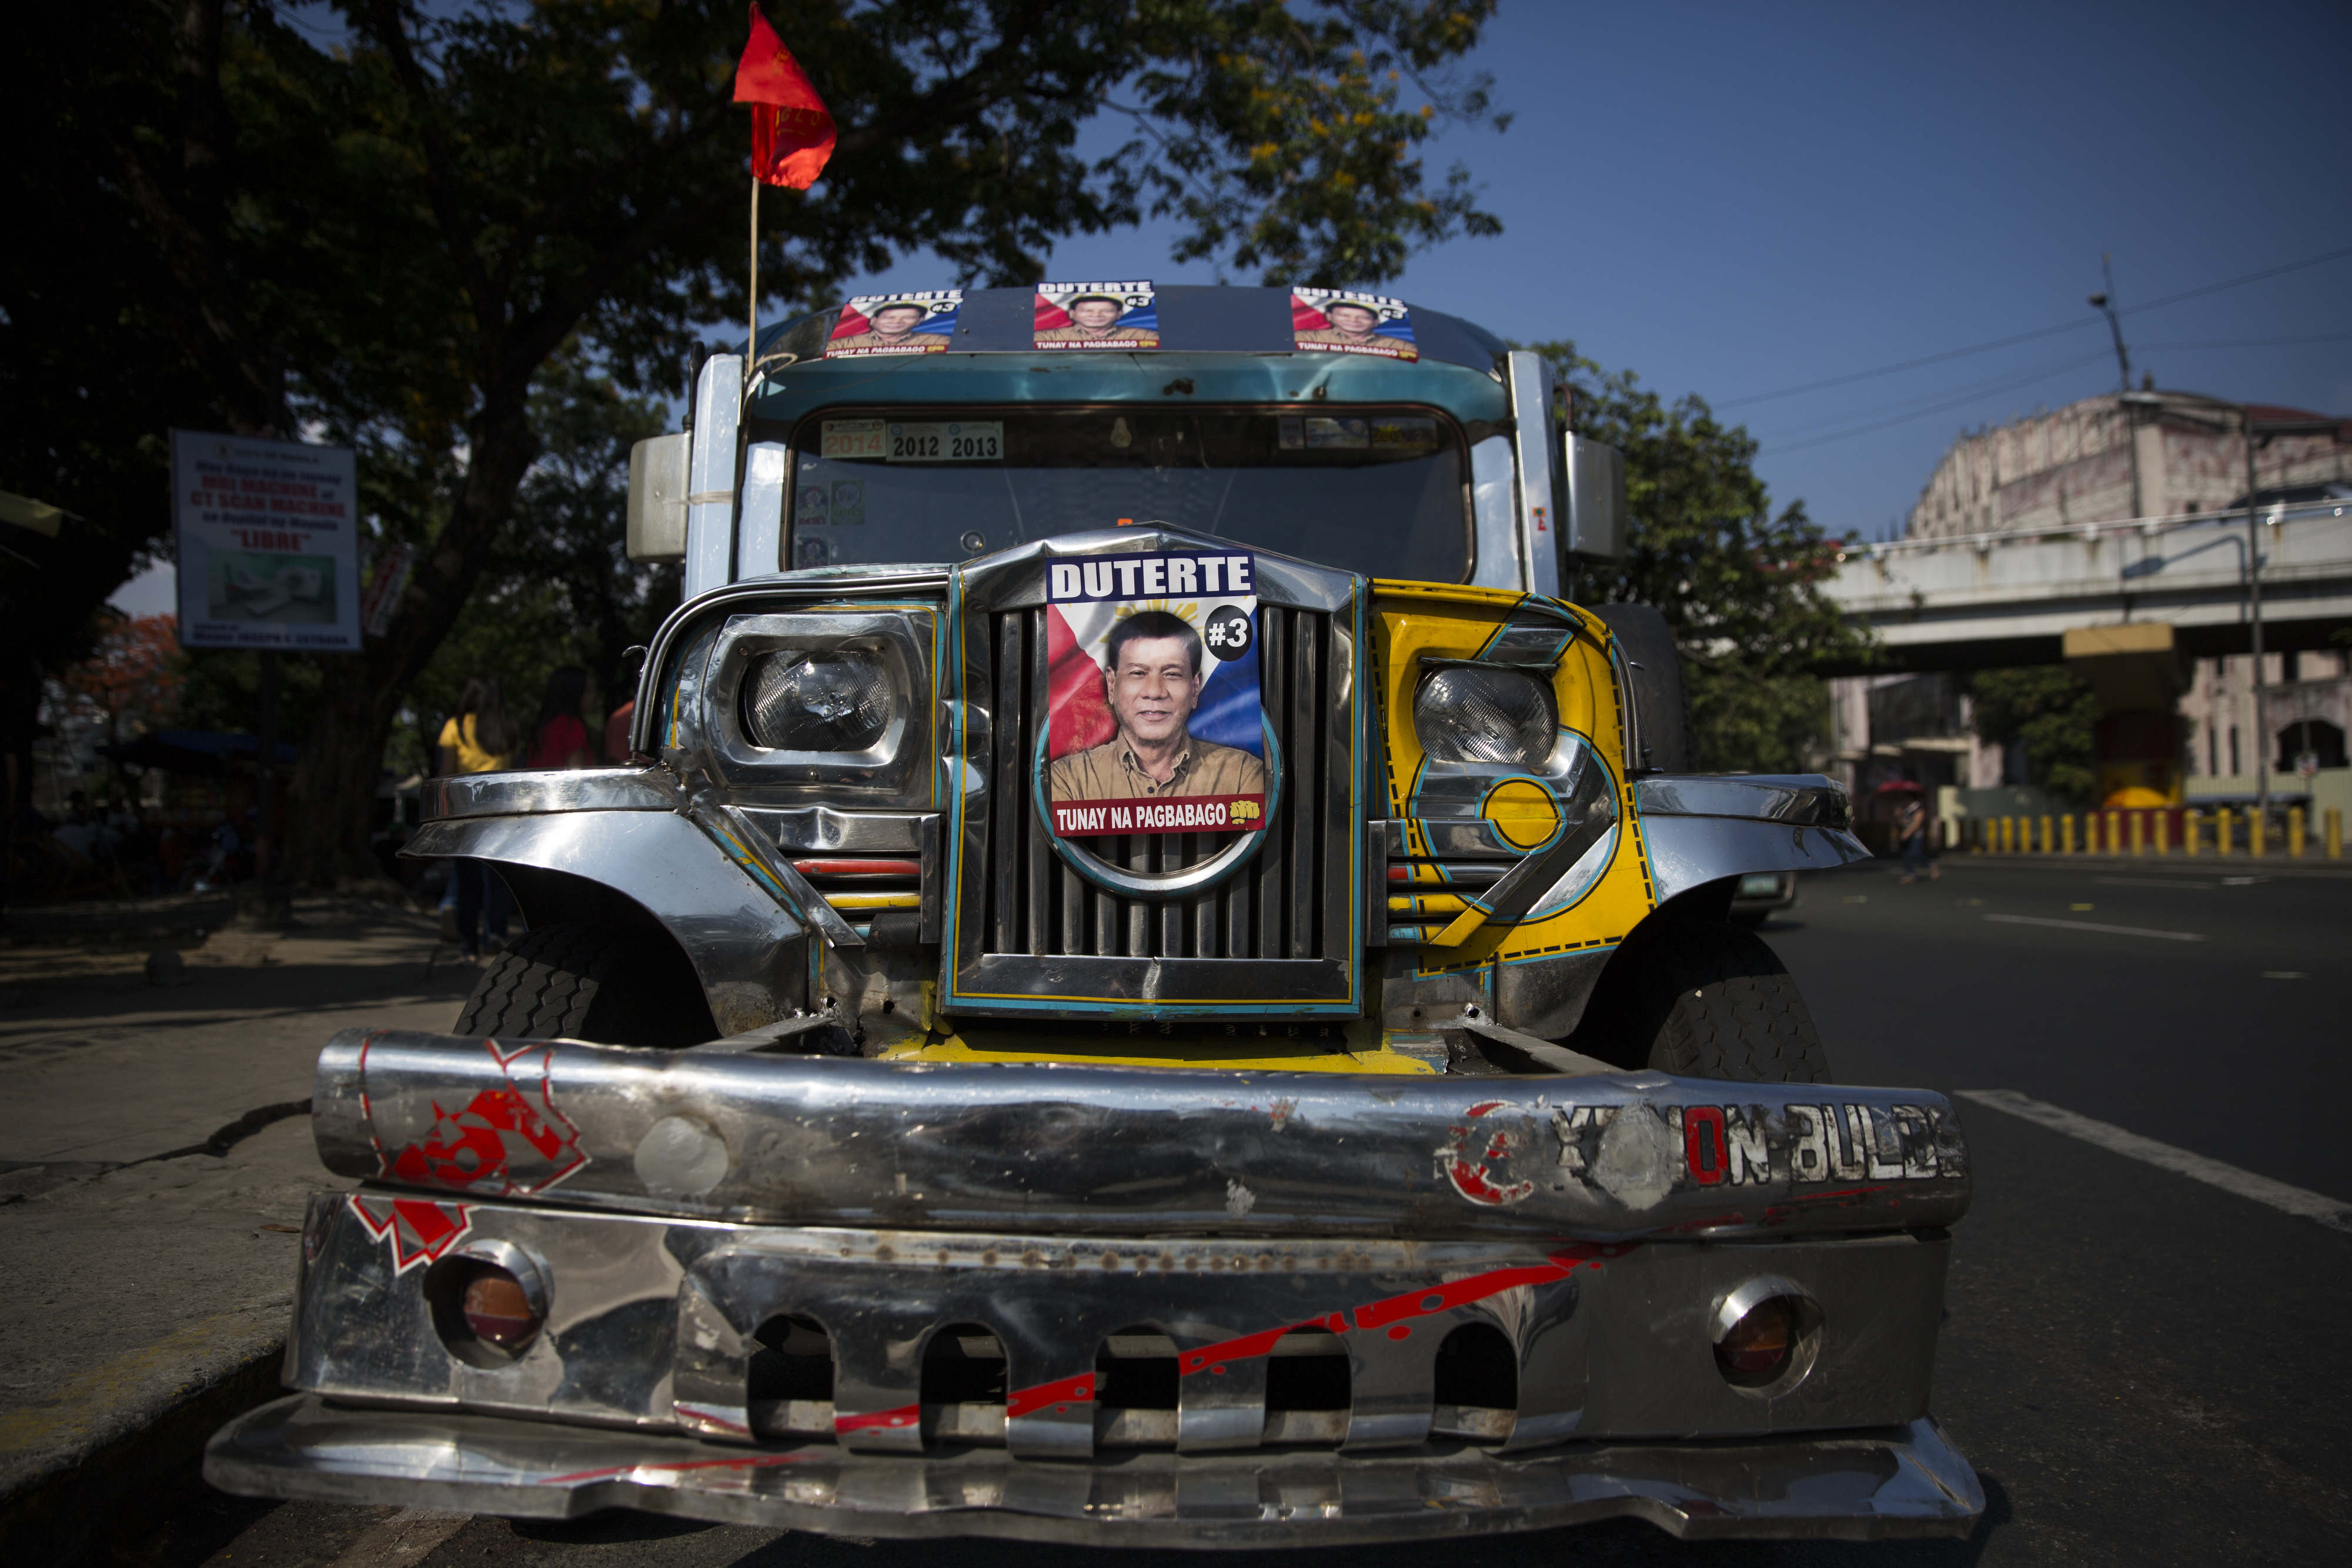 A jeepney, or jeep, is decorated with posters showing the face of Rodrigo Duterte, mayor of Davao City and presidential candidate, at a campaign rally in Manila on May 1, 2016 (Taylor Weidman—Bloomberg/Getty Images)